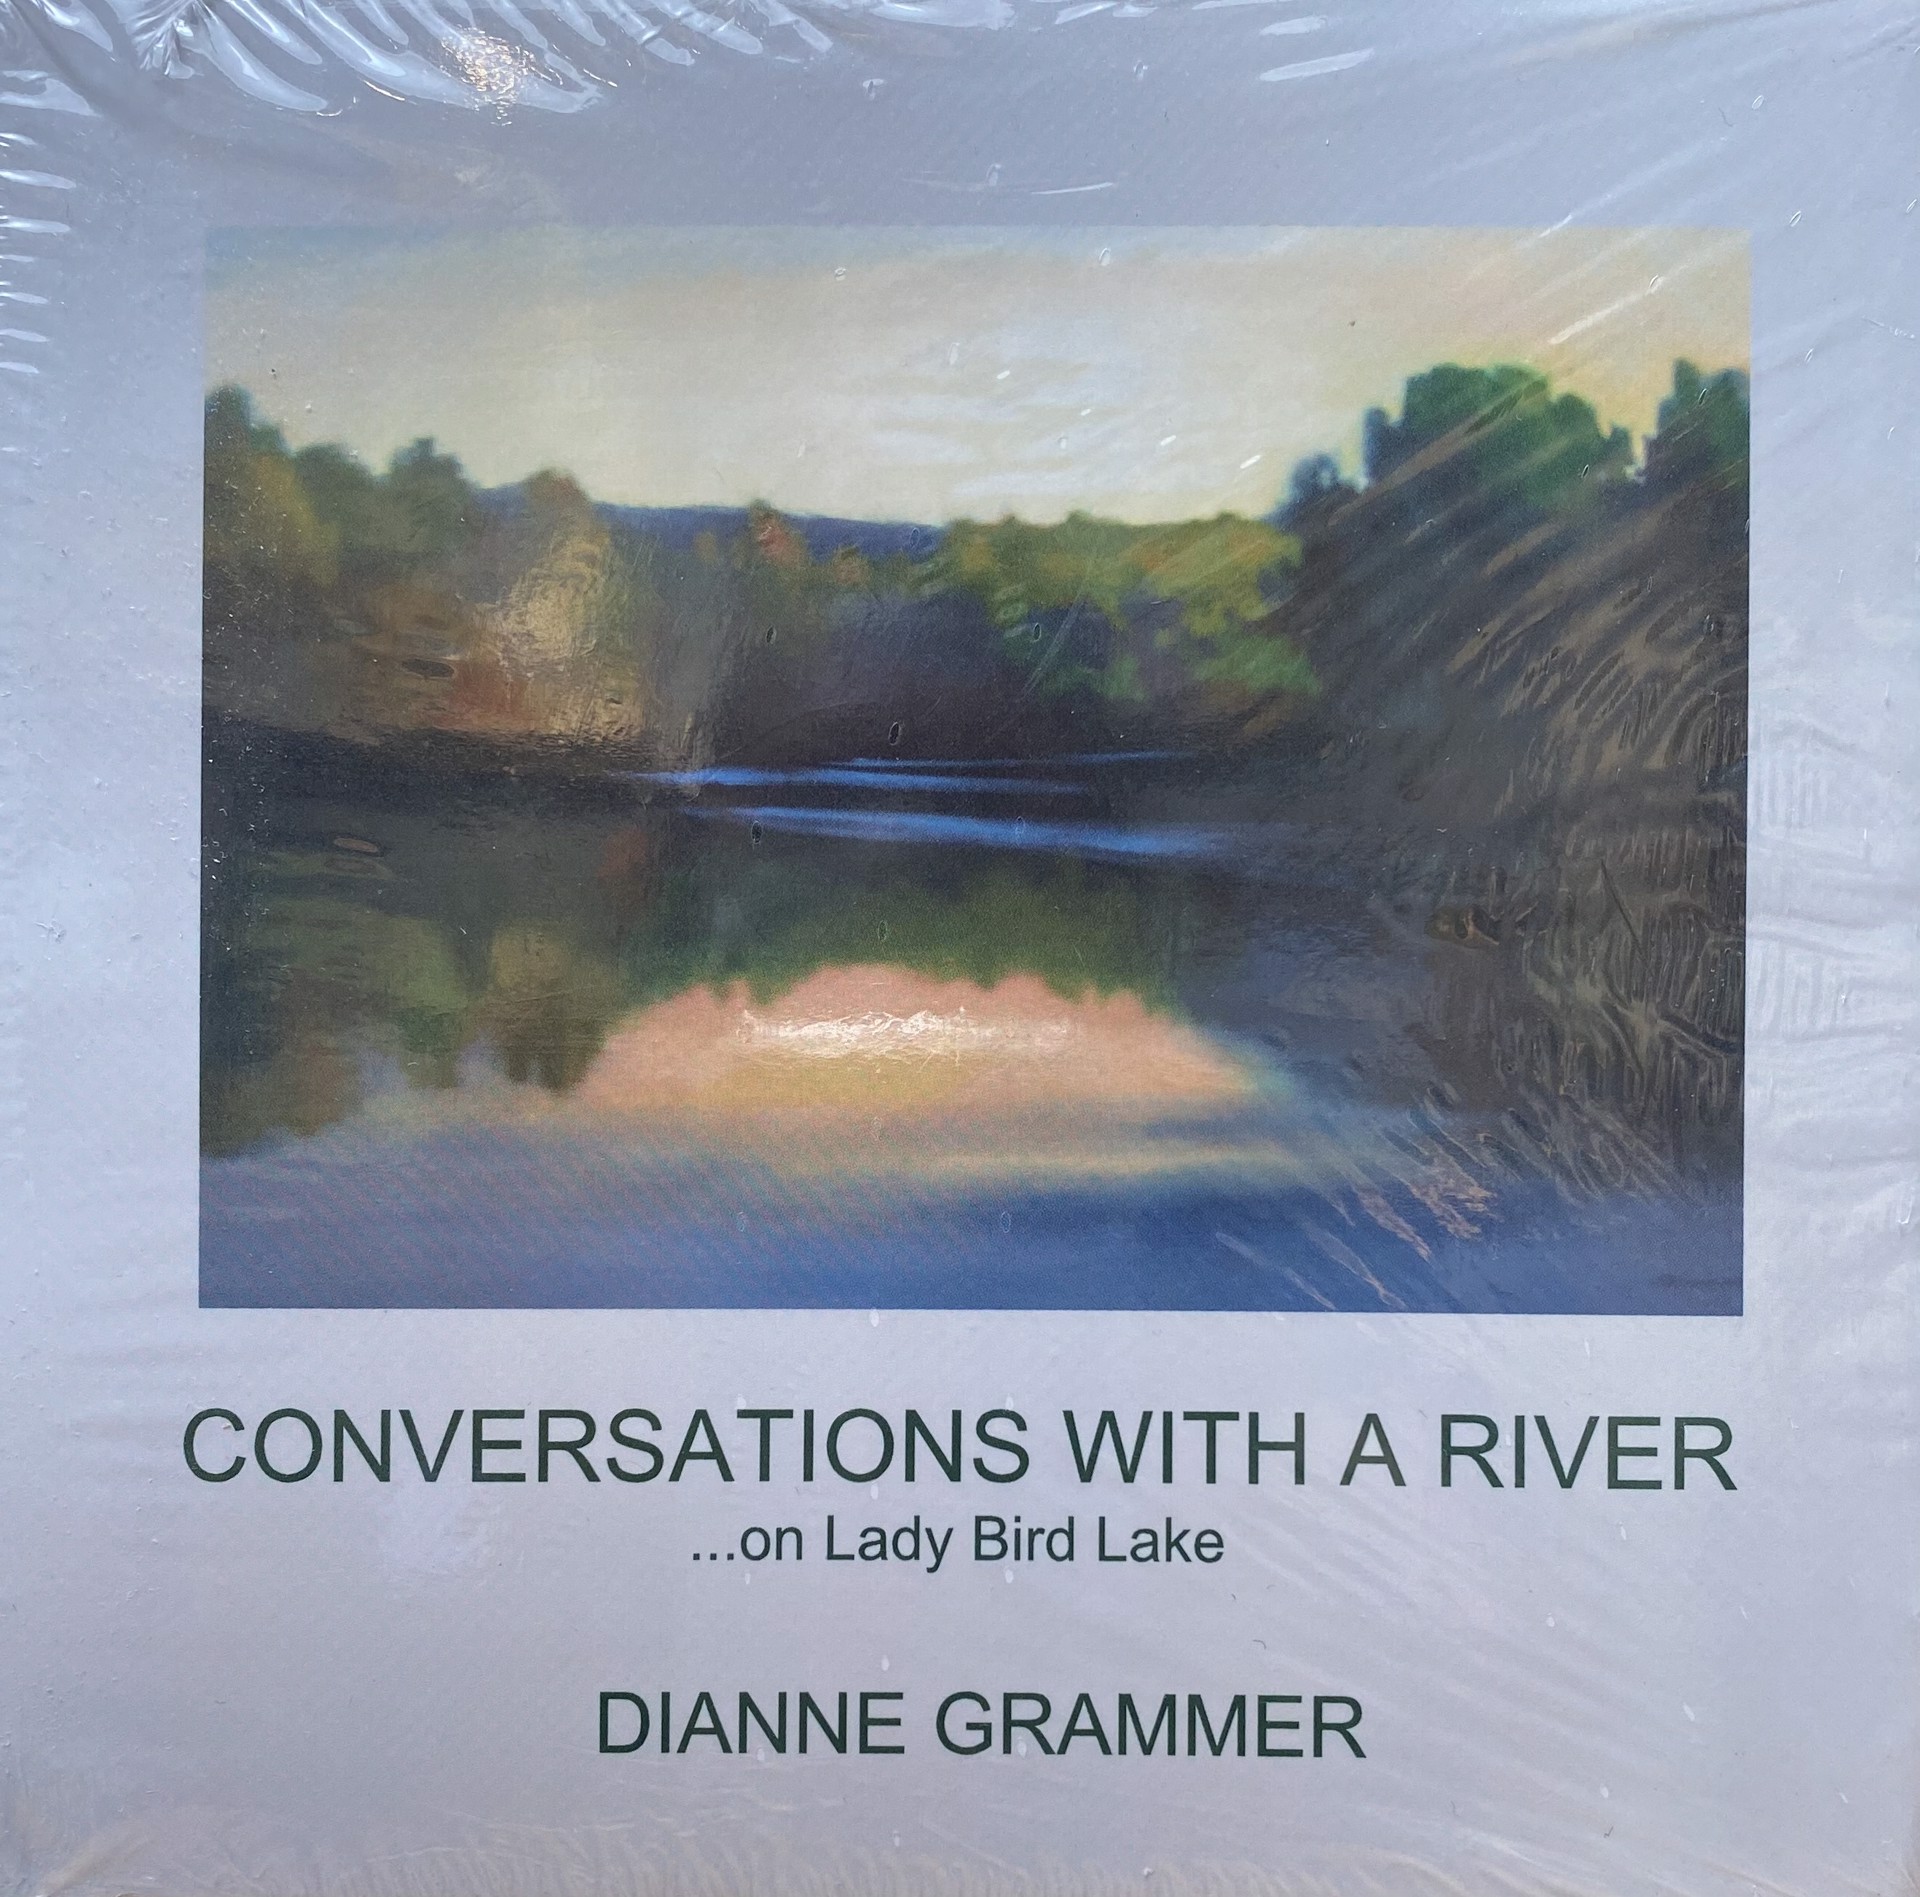 Dianne Grammer: Conversations with a River... (HC; 16/18) by Dianne Grammer